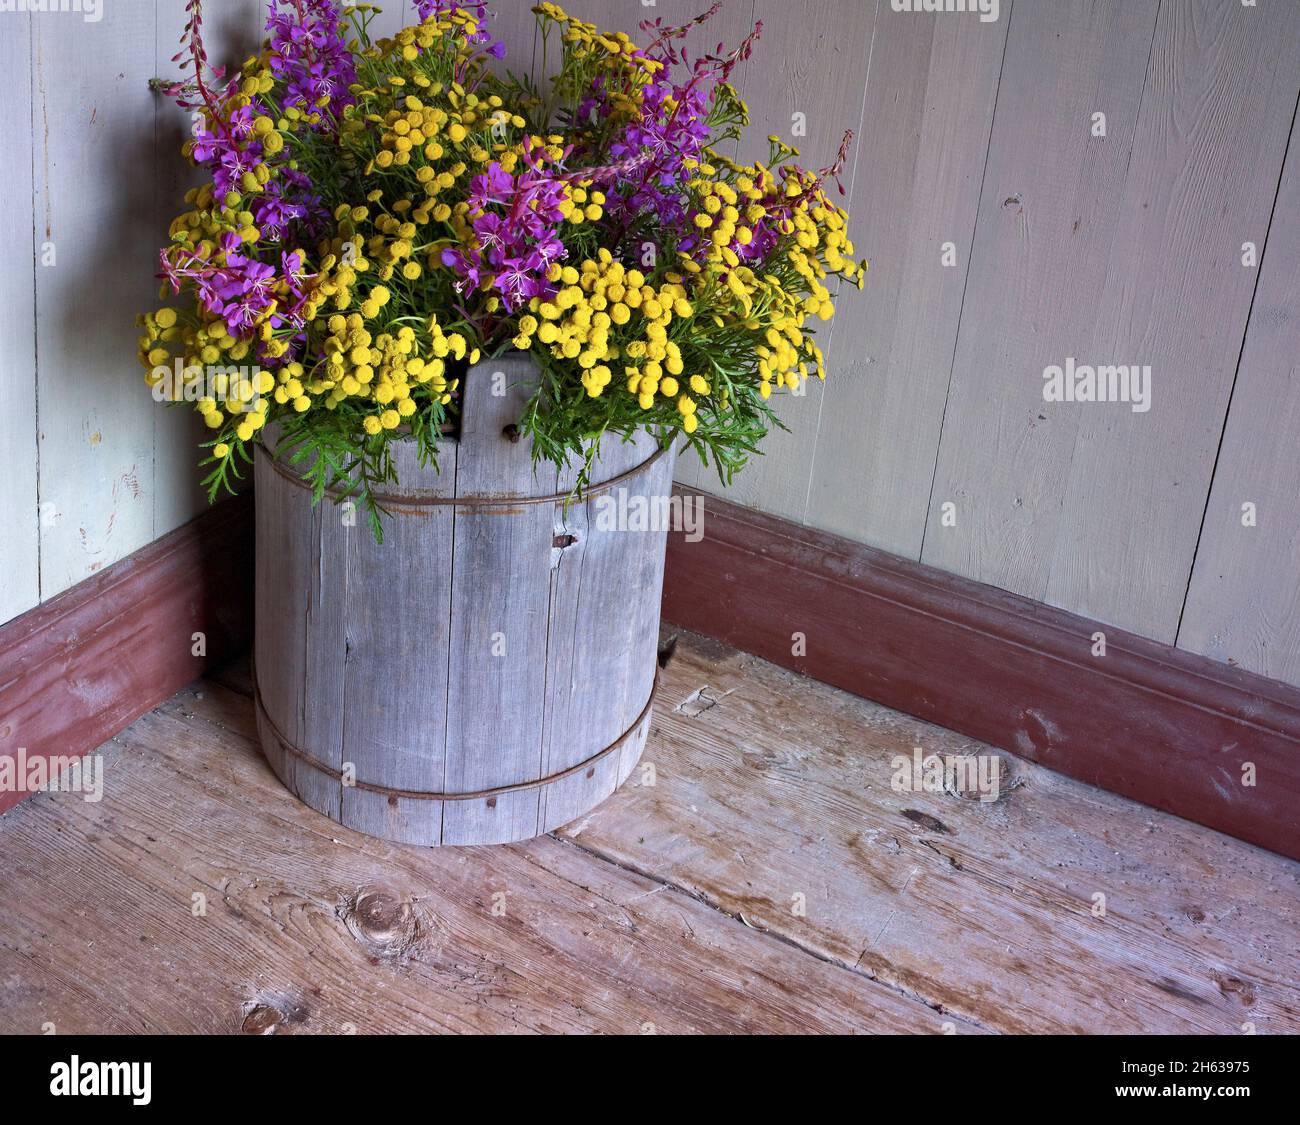 europe,sweden,jämtland province,härjedalen,wooden tub with a bouquet of flowers,fireweed,tansy Stock Photo